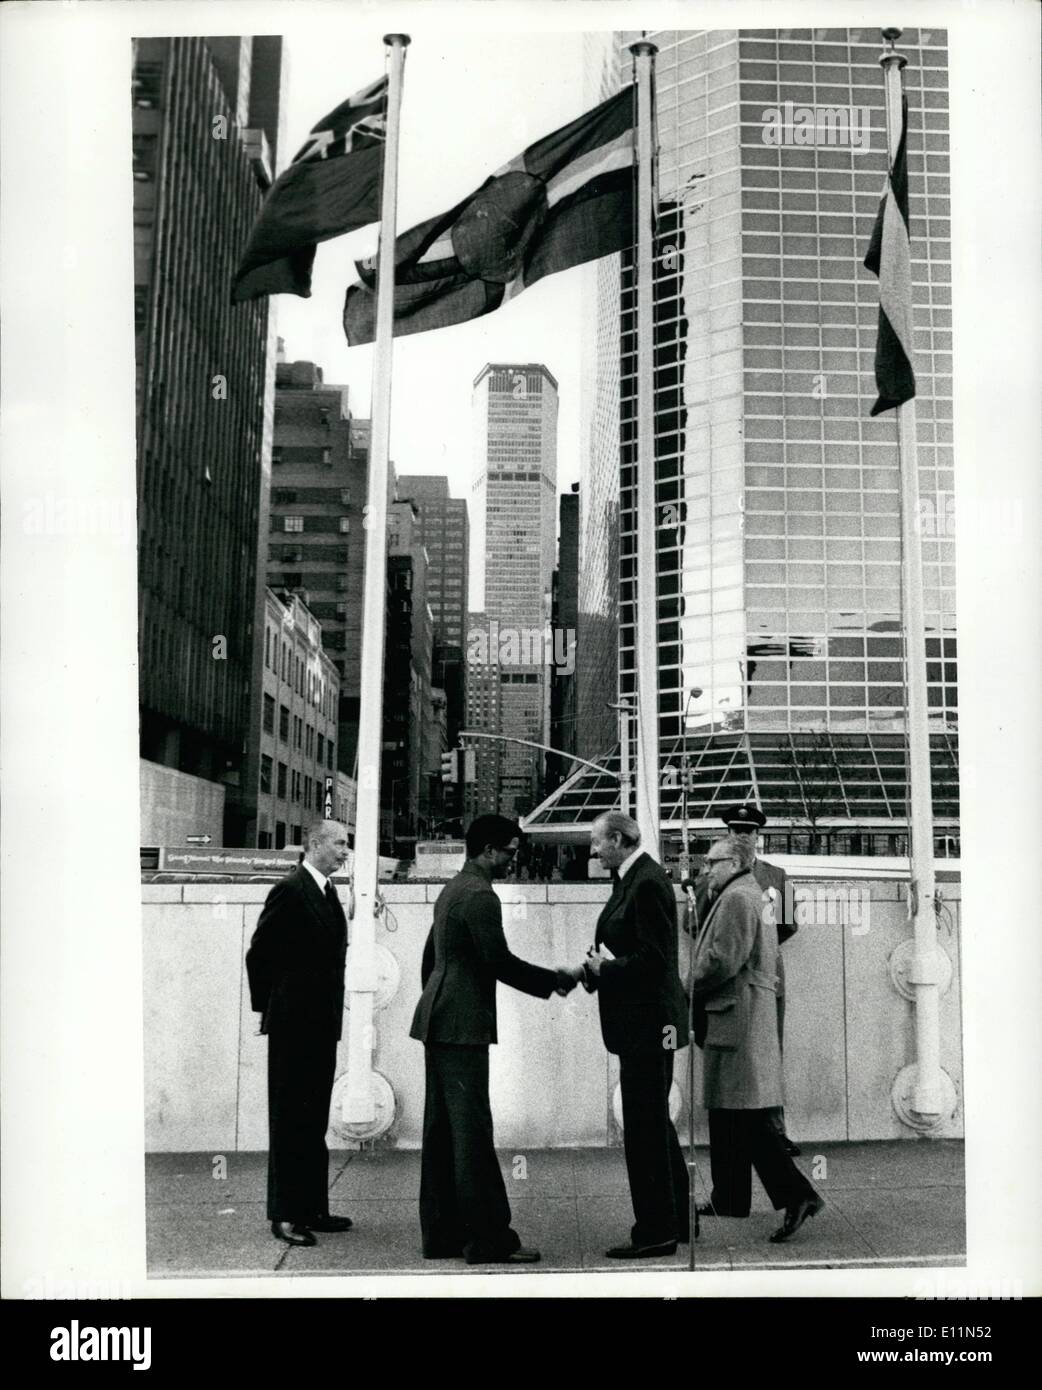 Dec. 12, 1978 - Flag Of Dominica Raised: The flag of Dominica was raised at a ceremony this afternoon in front of the delegates' entrance to United Nations Headquarters, following the country's admission as the 151st Member nation yesterday afternoon. The Secretary-General, Kurt Waldheim, welcomed Arlington Riviere, the representative of the people and Government of the Commonwealth of Dominica, the world's newest independent State, and expressed appreciation to the United Kingdom for its role as the Administering Authority, in encouraging and assisting in the country's peaceful transition Stock Photo